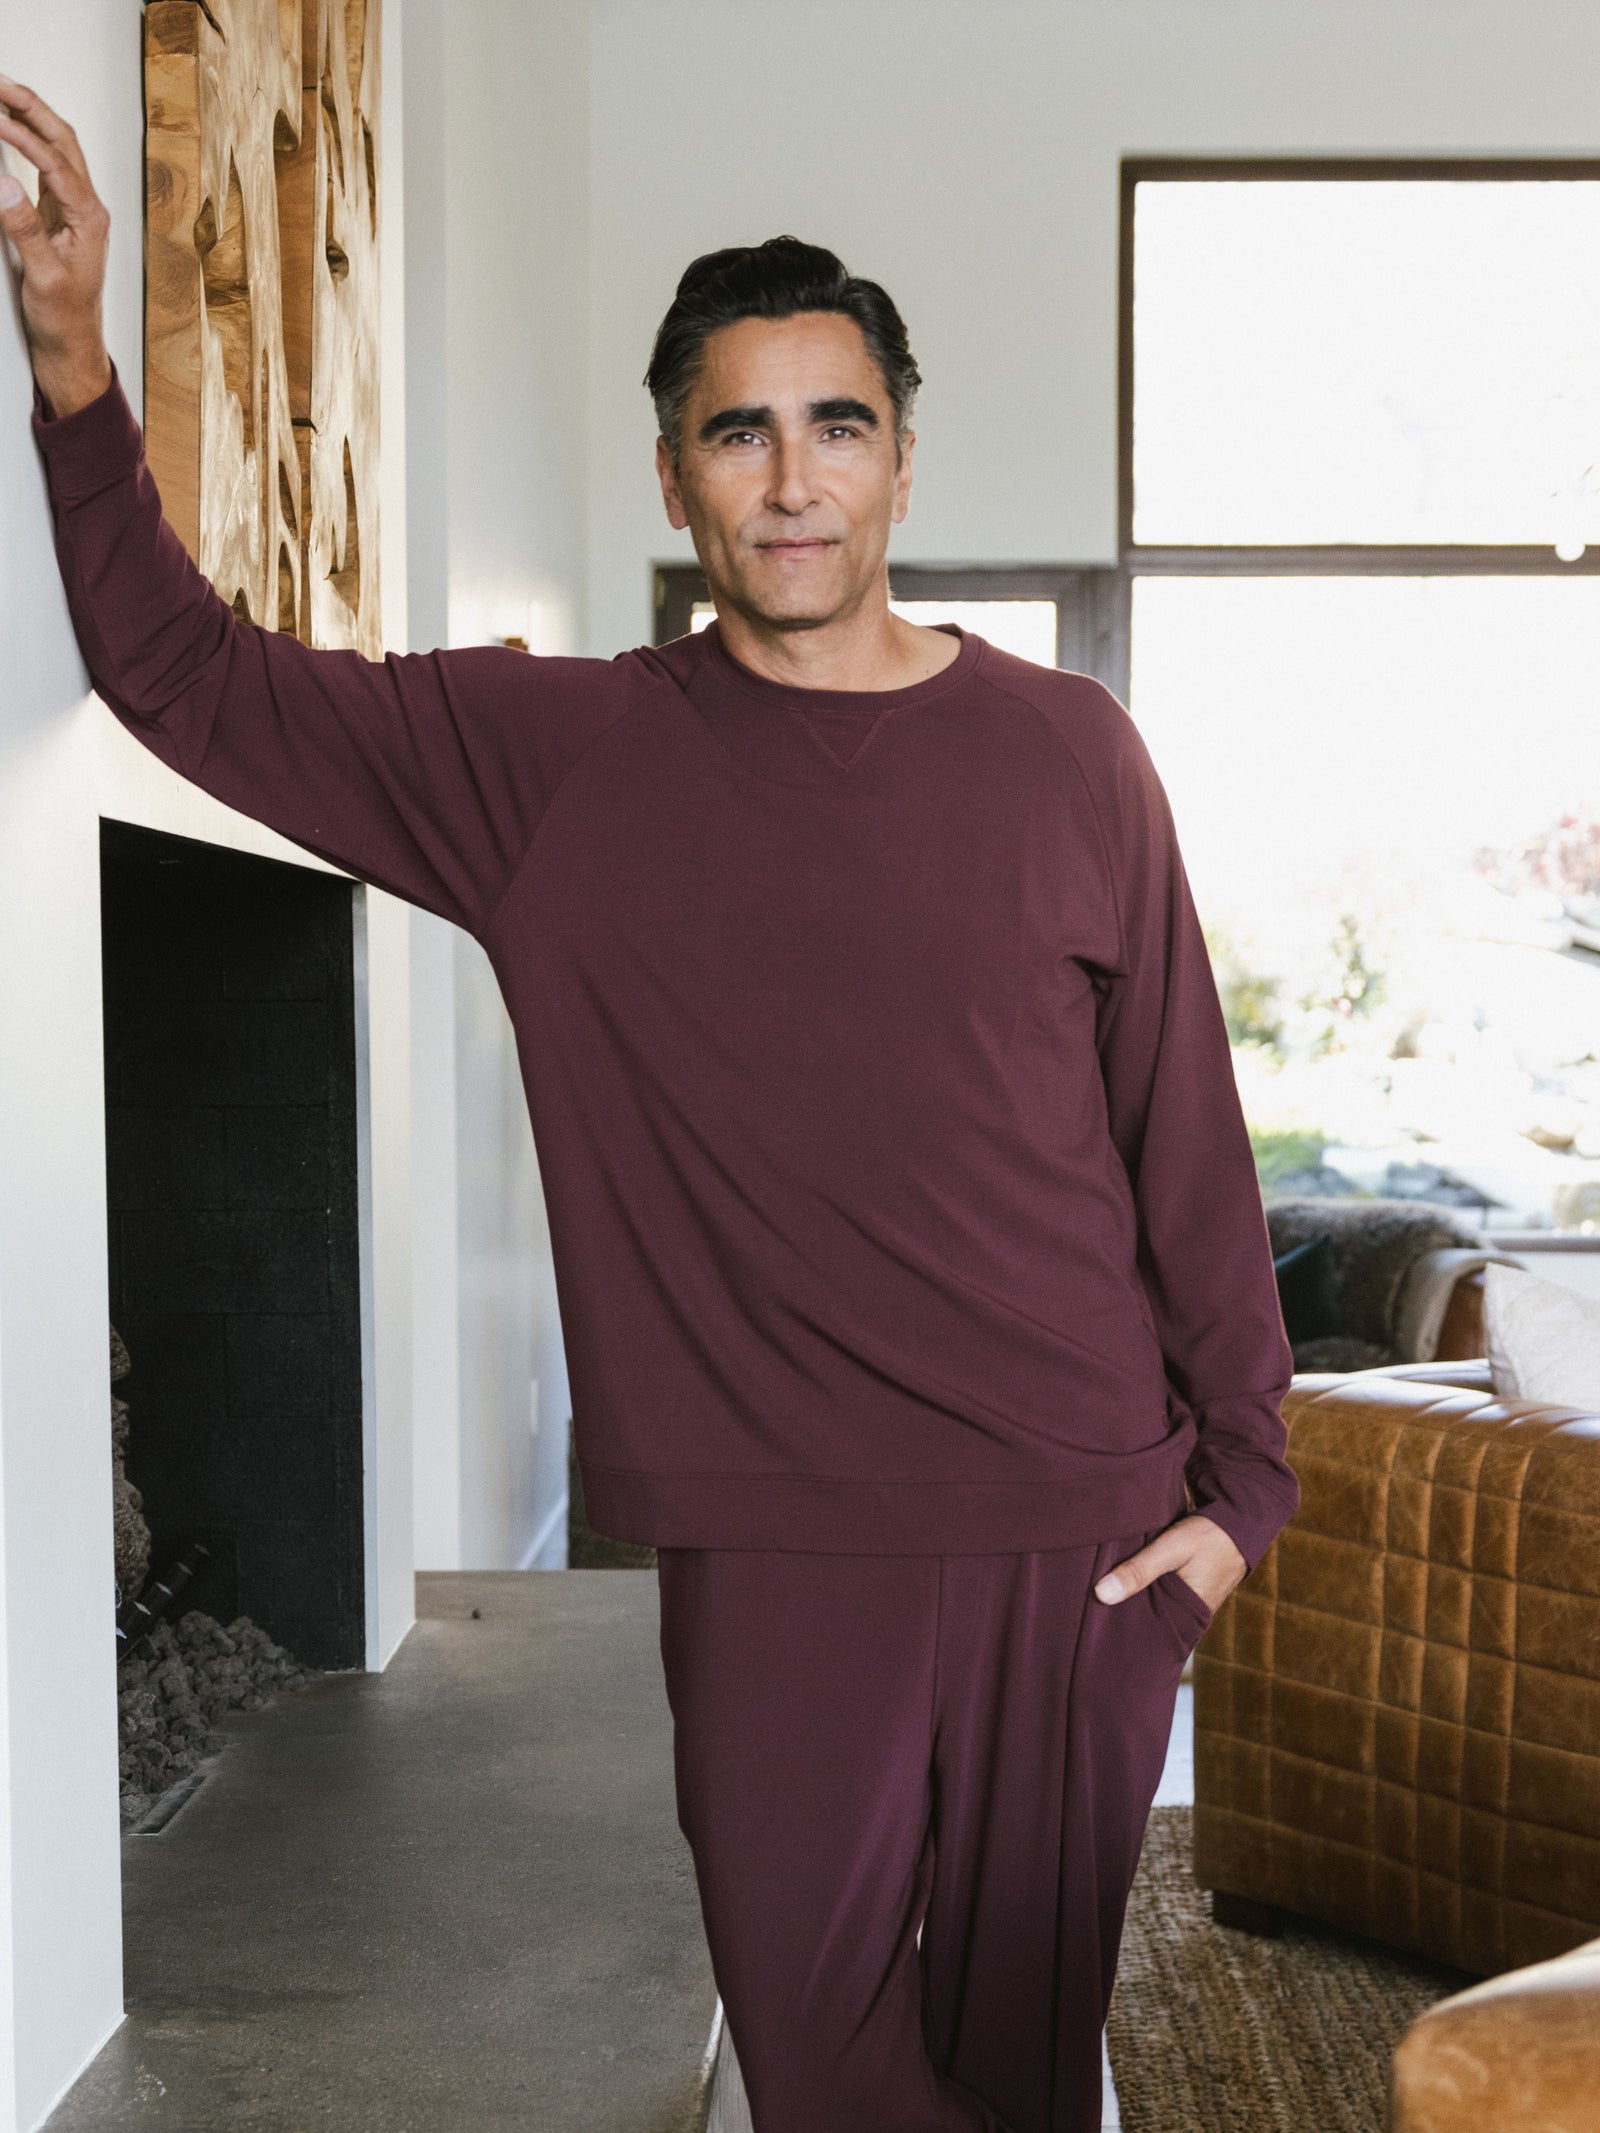 Burgundy Men's Bamboo Jogger Set. There is a man wearing the jogger set. He is standing in a well lit room in a home.